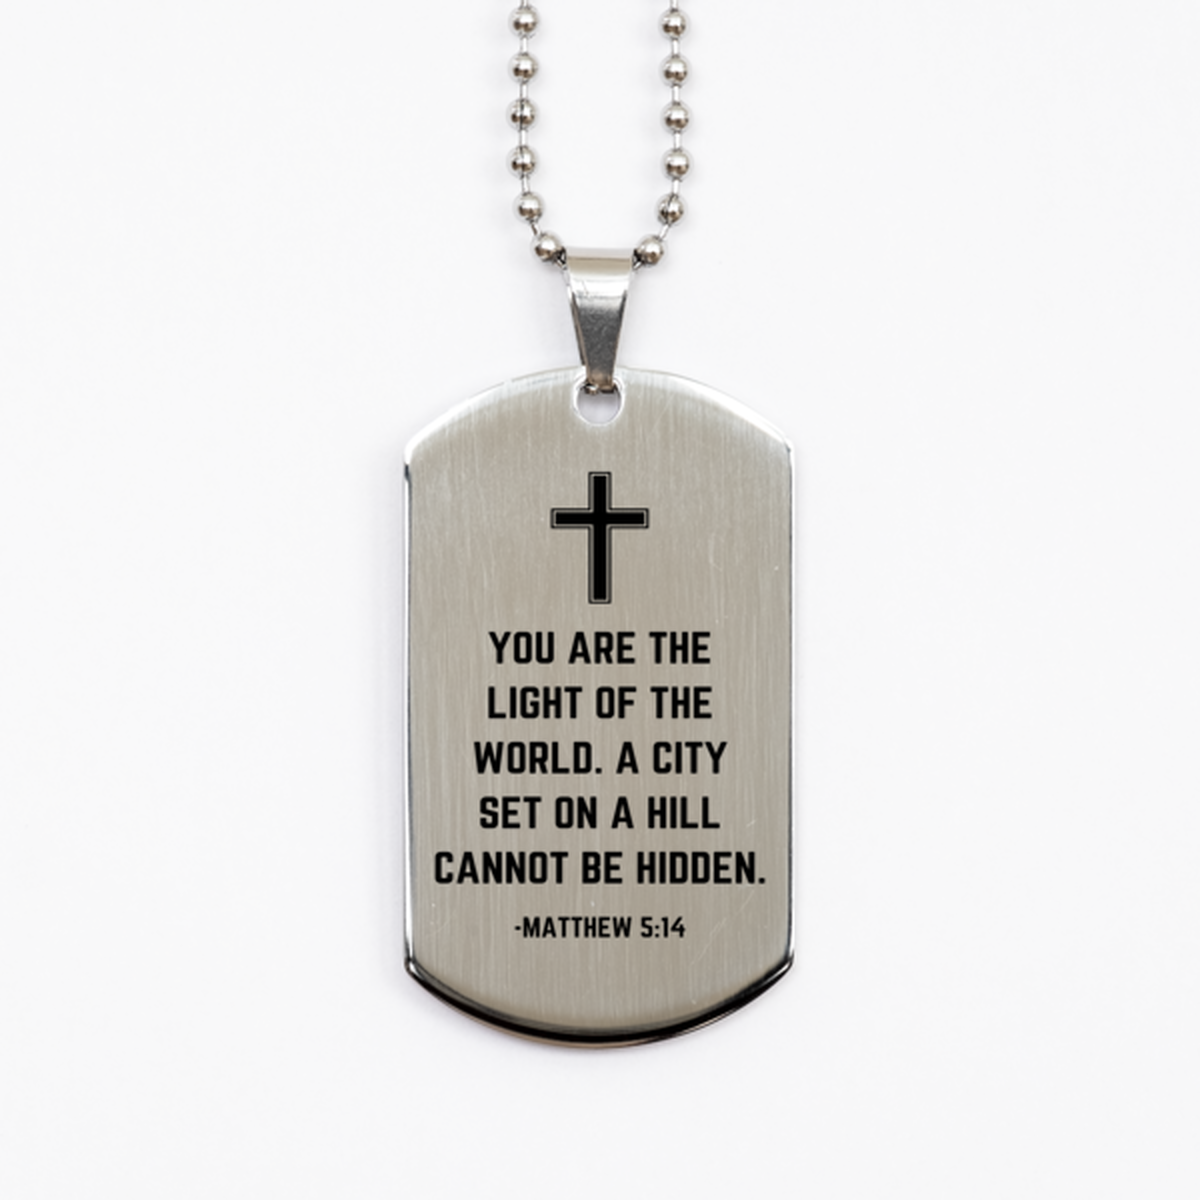 Baptism Gifts For Teenage Boys Girls, Christian Bible Verse Silver Dog Tag, You are the light of the world, Confirmation Gifts, Bible Verse Necklace for Son, Godson, Grandson, Nephew